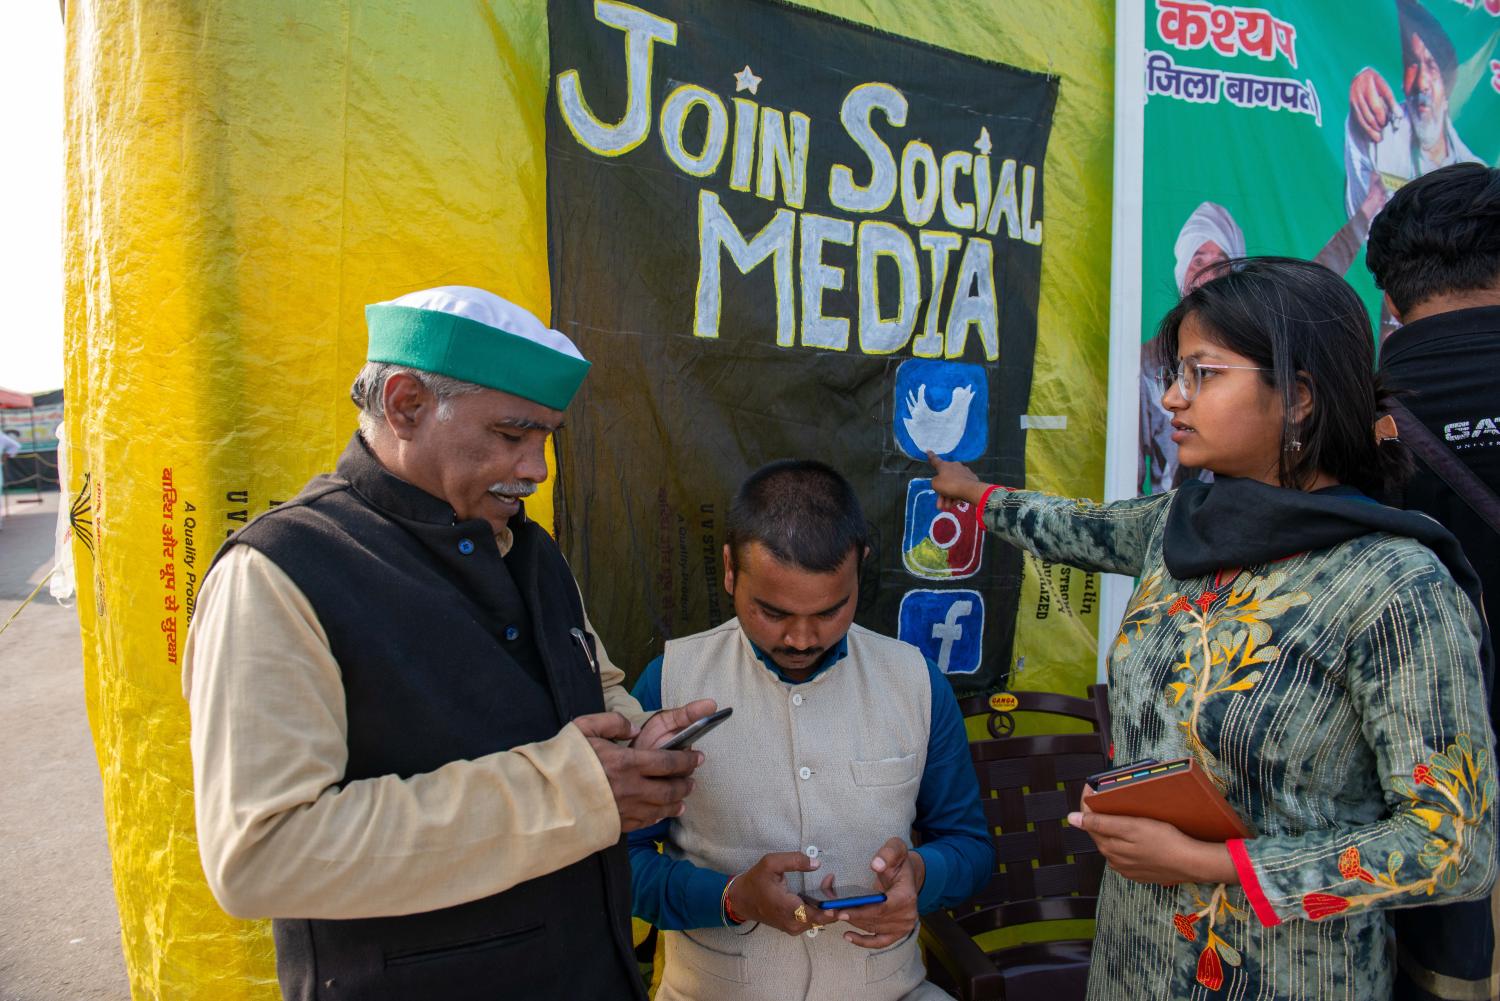 A member of the All India Student Federation teaches farmers about social media and how to use such tools as part of ongoing protests against the government.